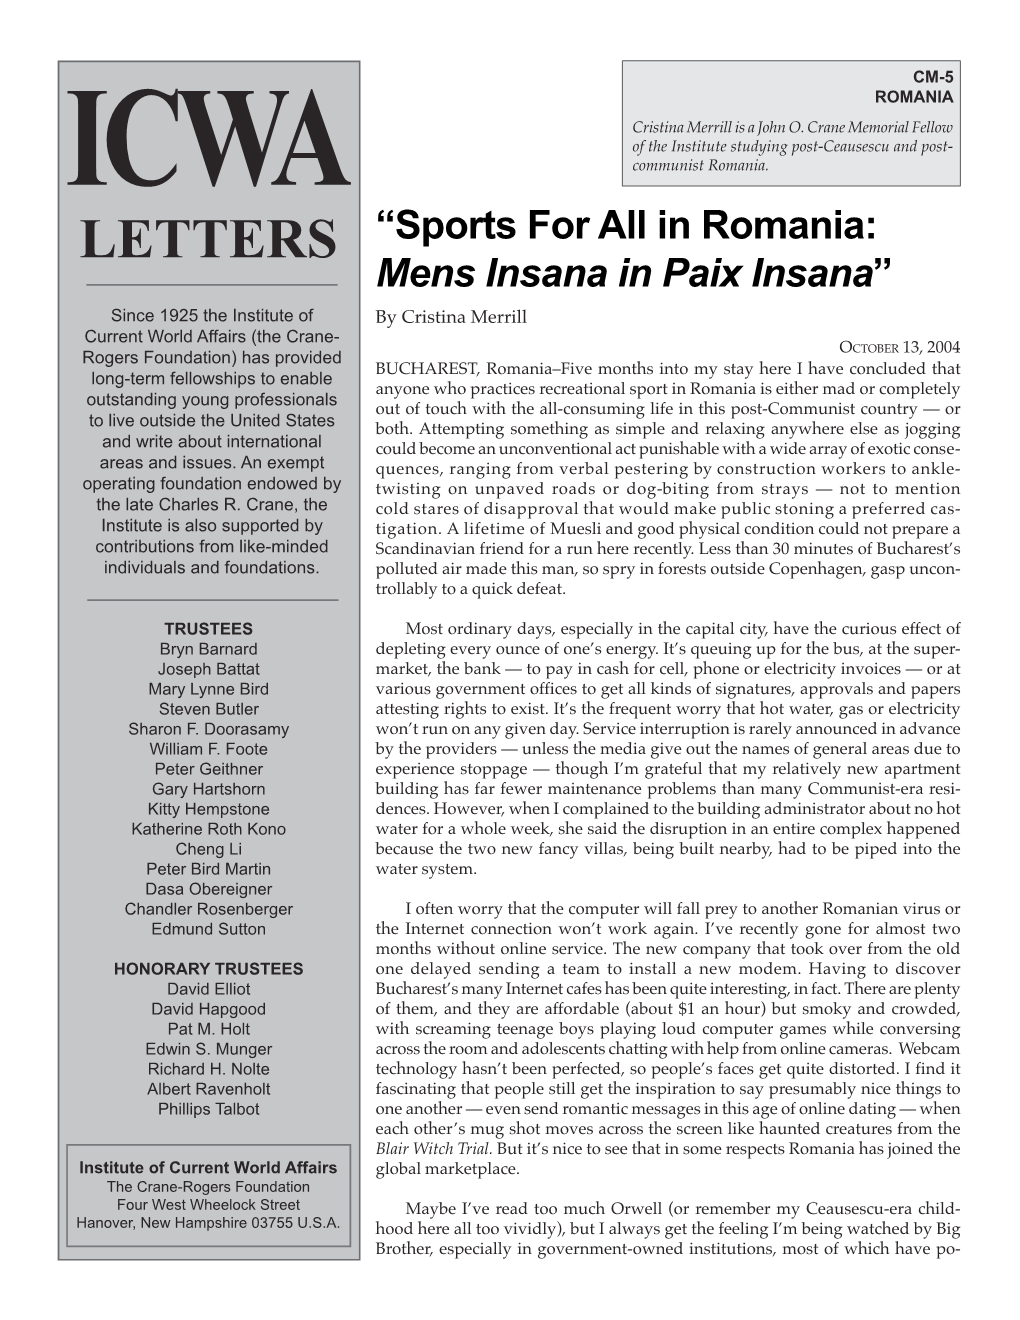 Sports for All in Romania